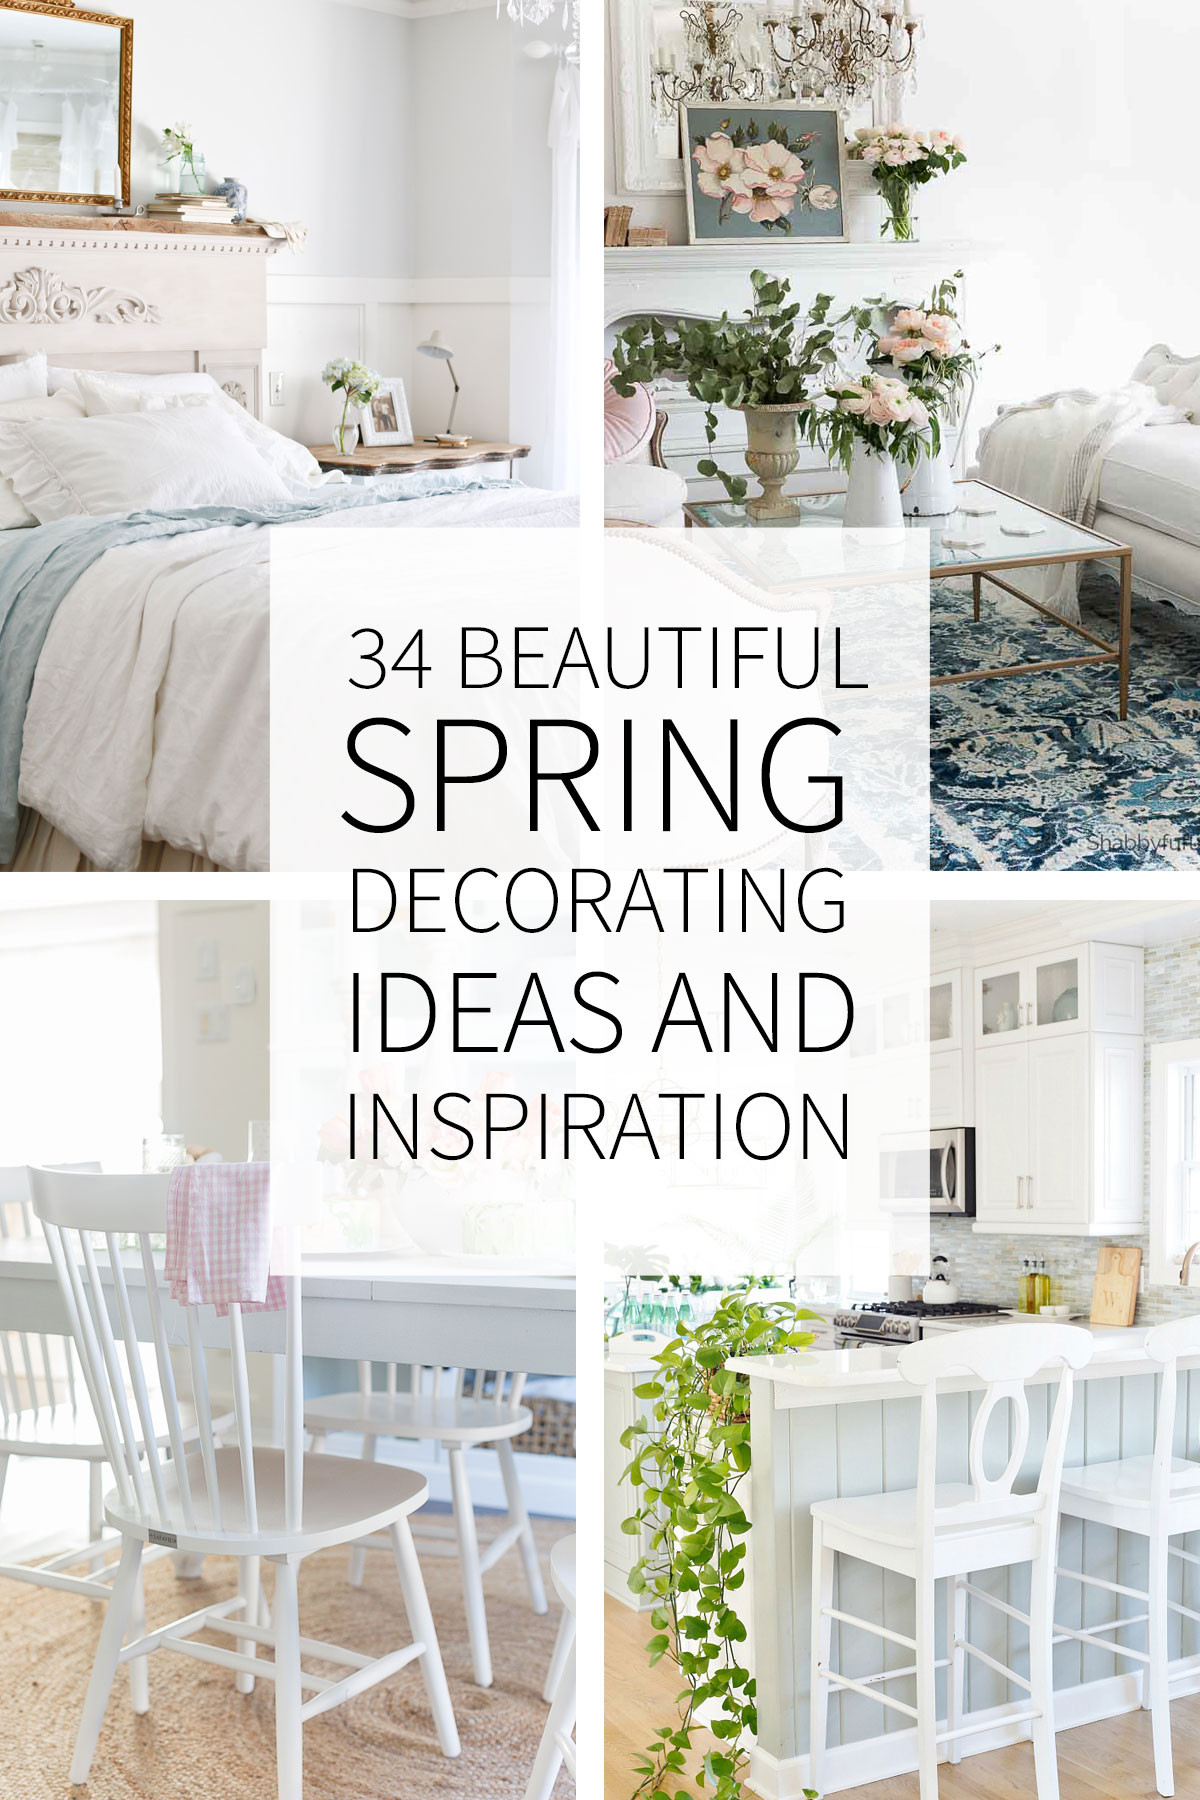 Spring Ideas For Home
 34 Inspiring and Beautiful Spring Decorating Ideas Tidbits